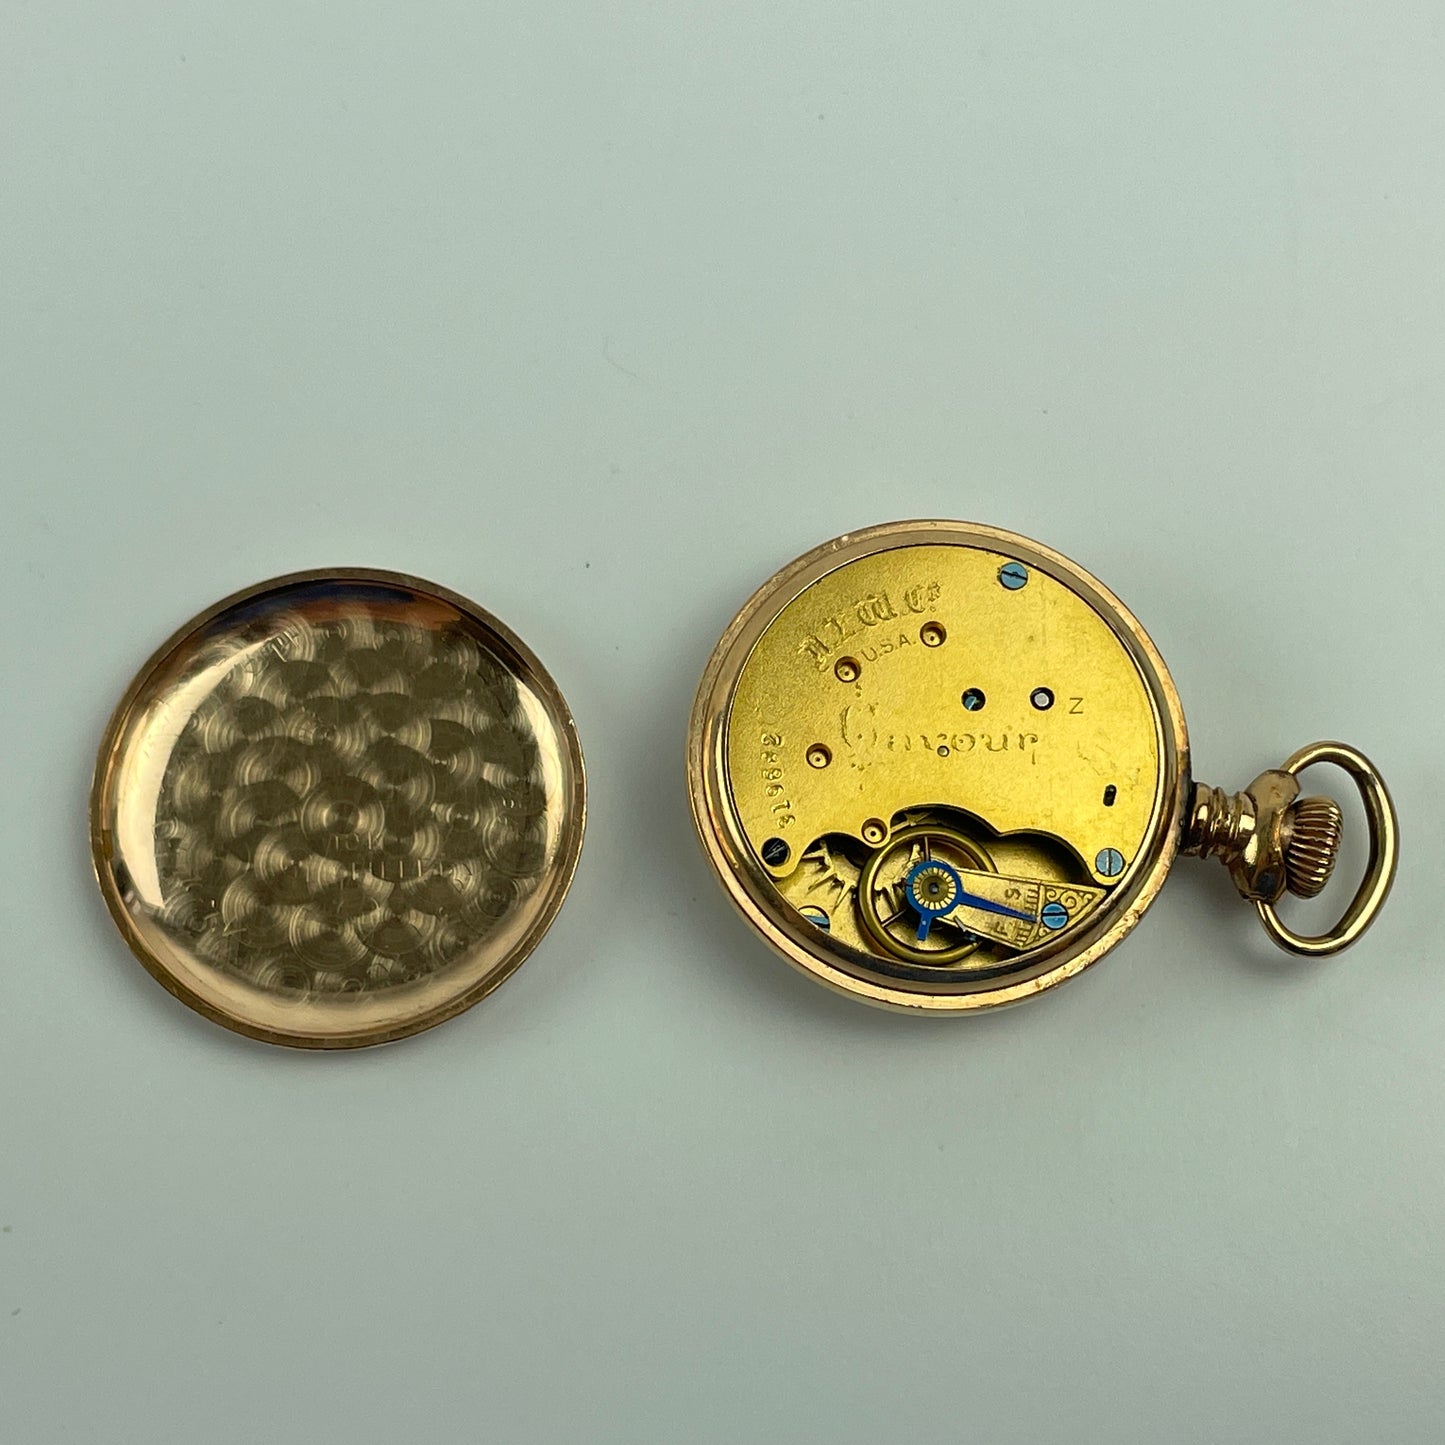 Lot 16- New England Watch Co. Ladies' Lapel Watches